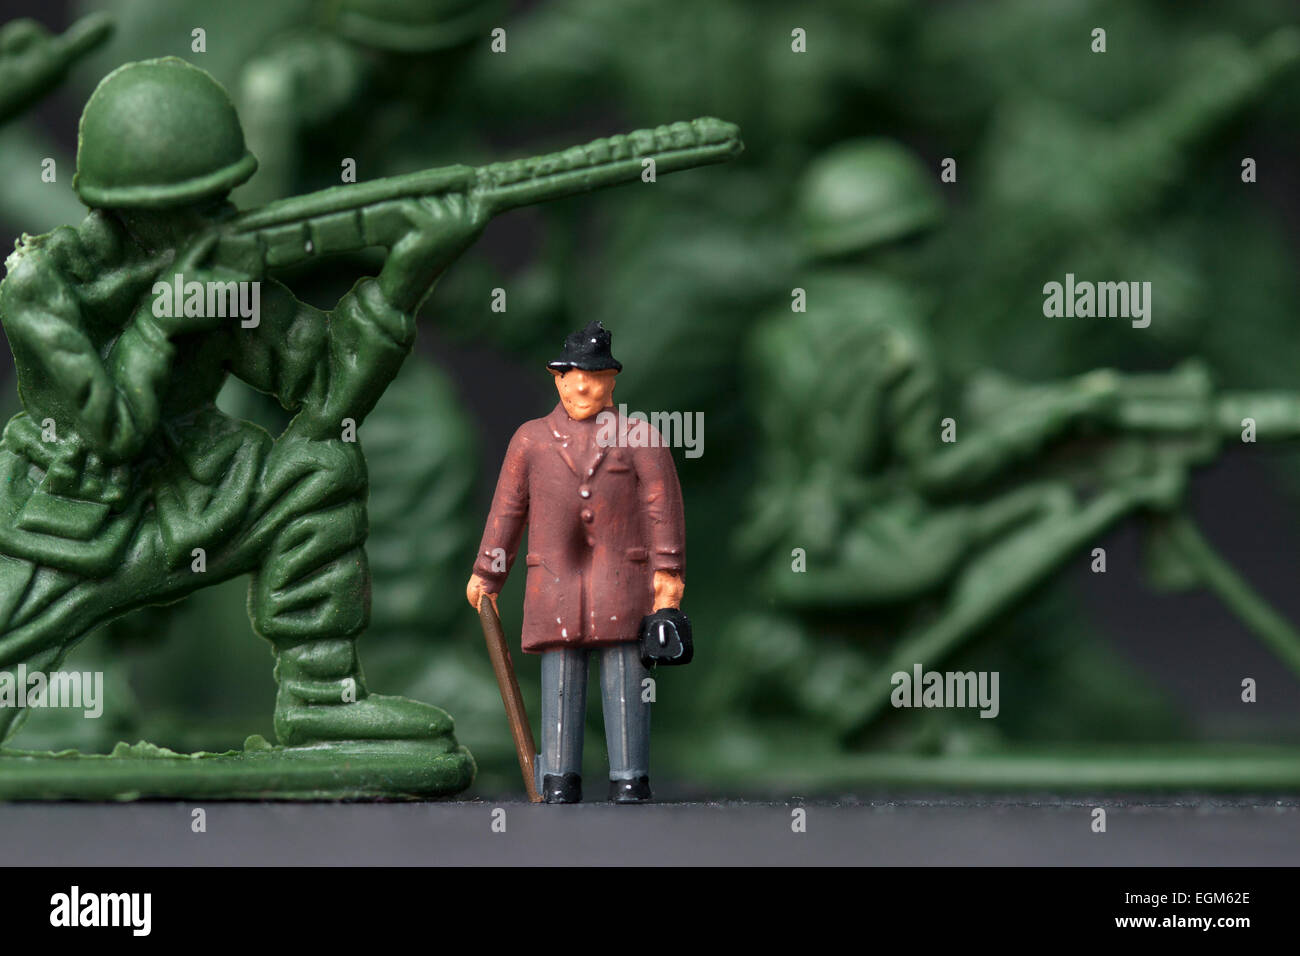 A miniature scale model figure standing amongst a set of green toy soldiers. Stock Photo